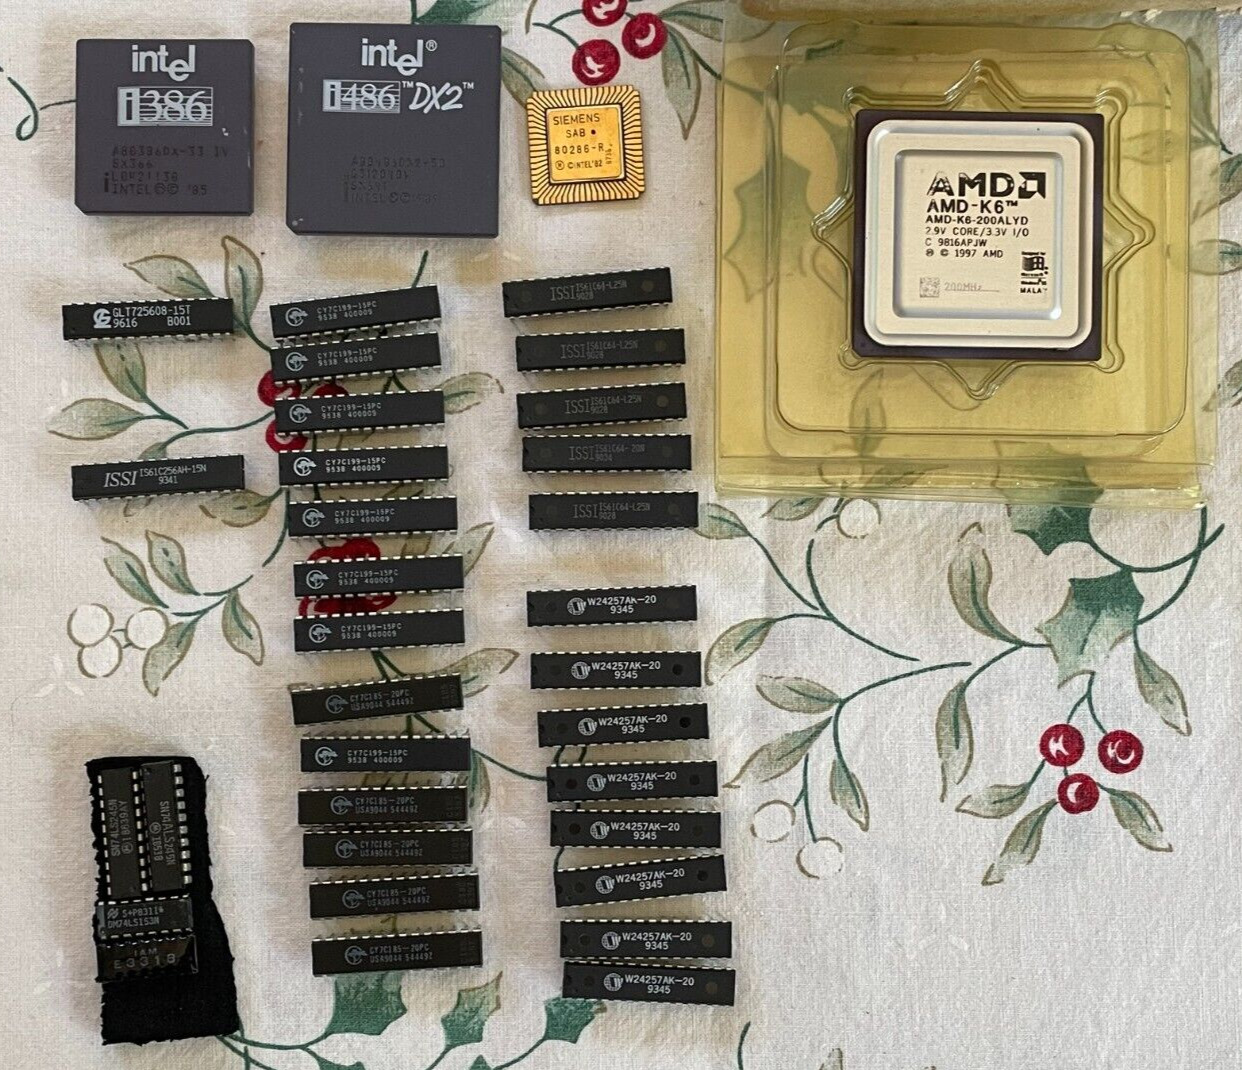 Vintage Processors and DRAM: A grab bag of parts